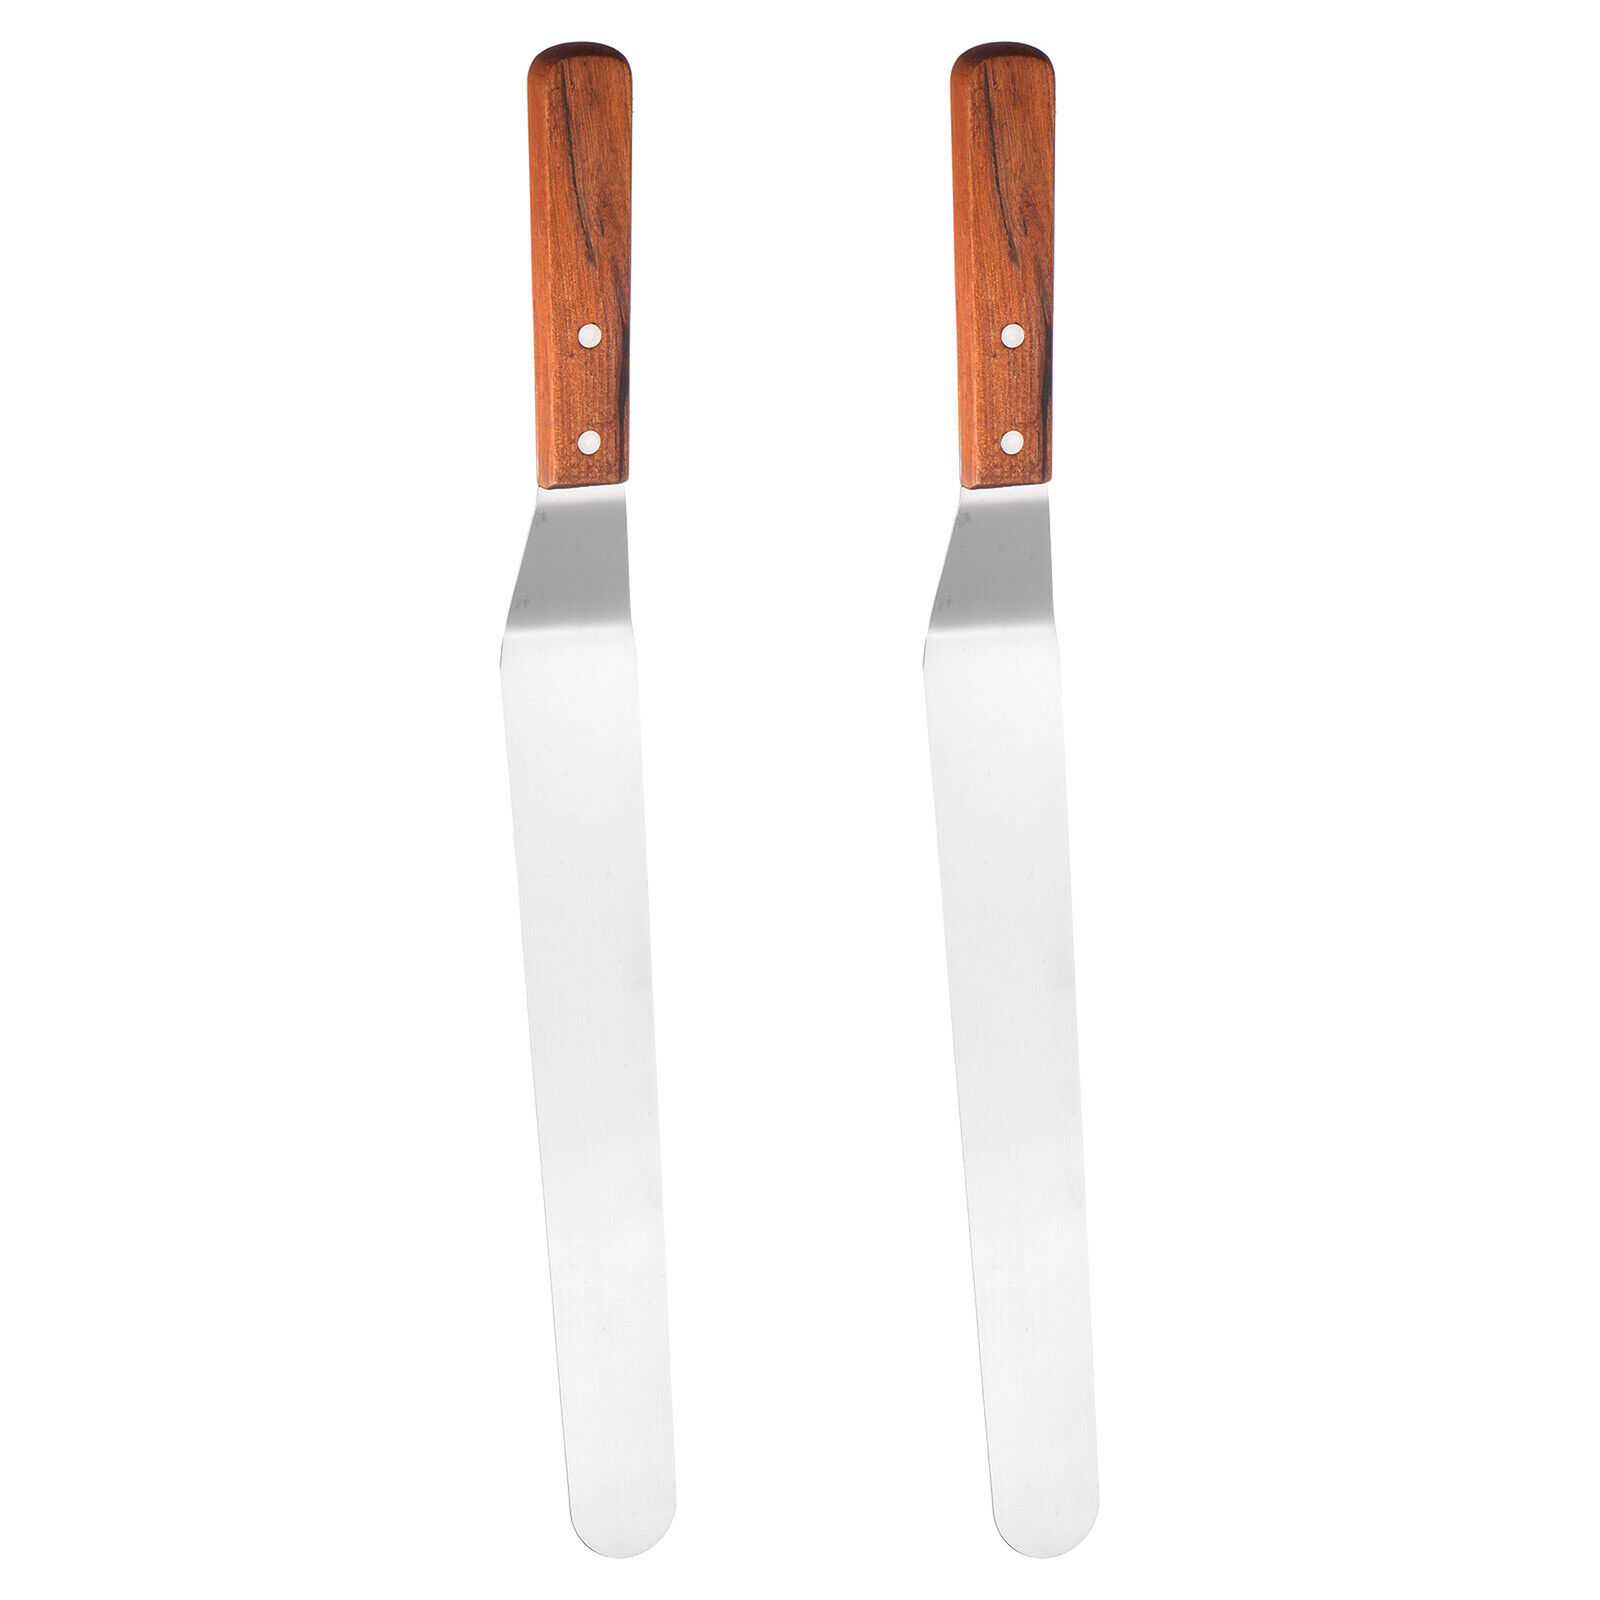 2pcspainting Knives 12"x1.26" Round Head Curved Palette Scraper With Wood Handle